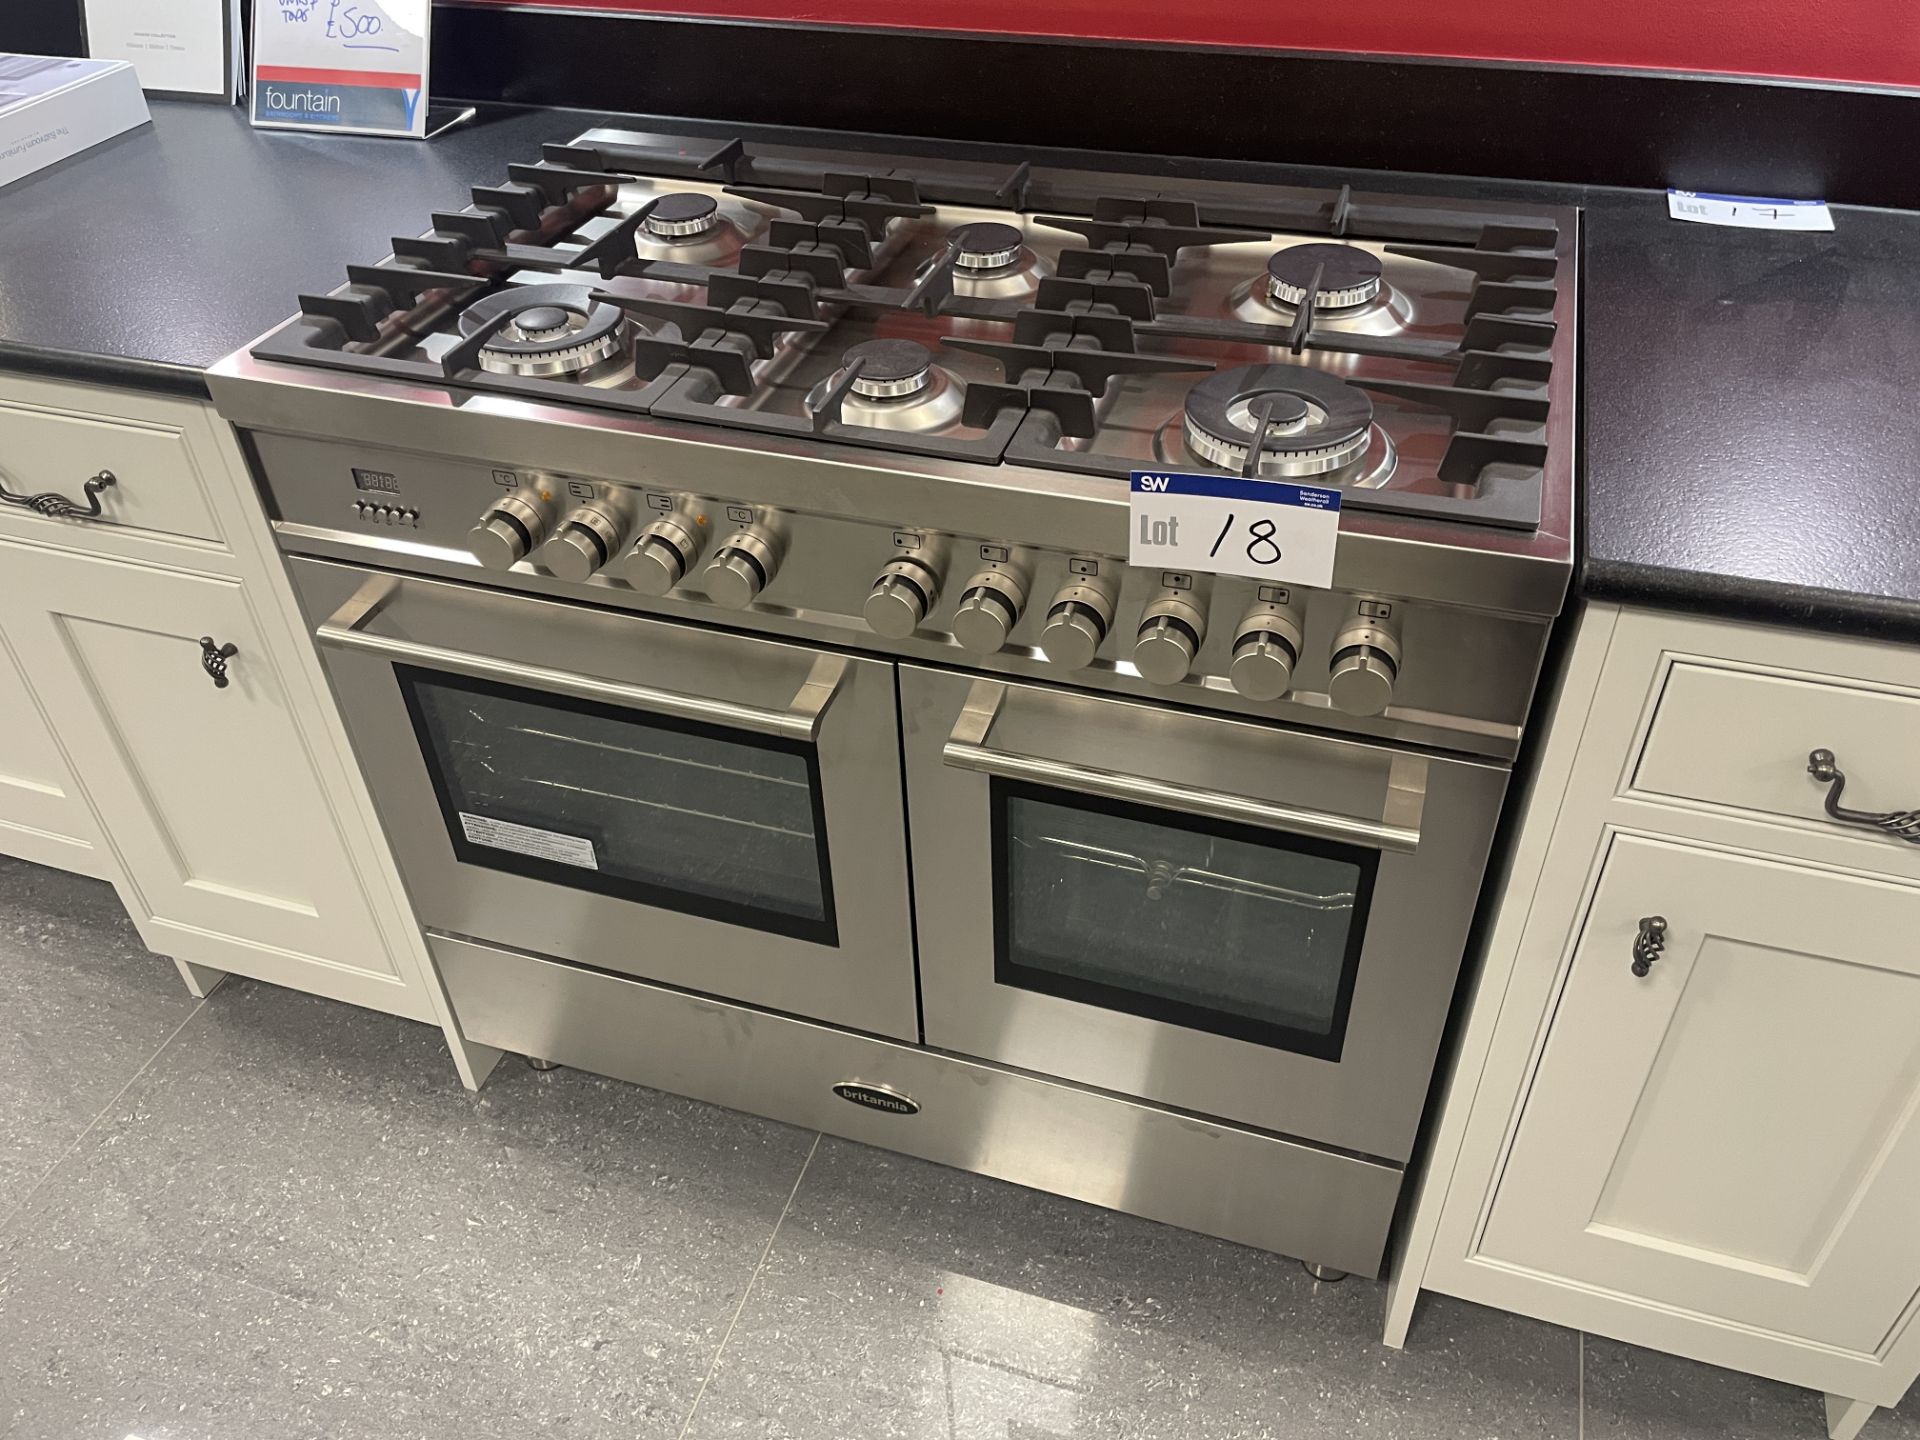 Britannia 1000 Six Hob Range Cooker (please note this lot is part of combination lot 19A) Please